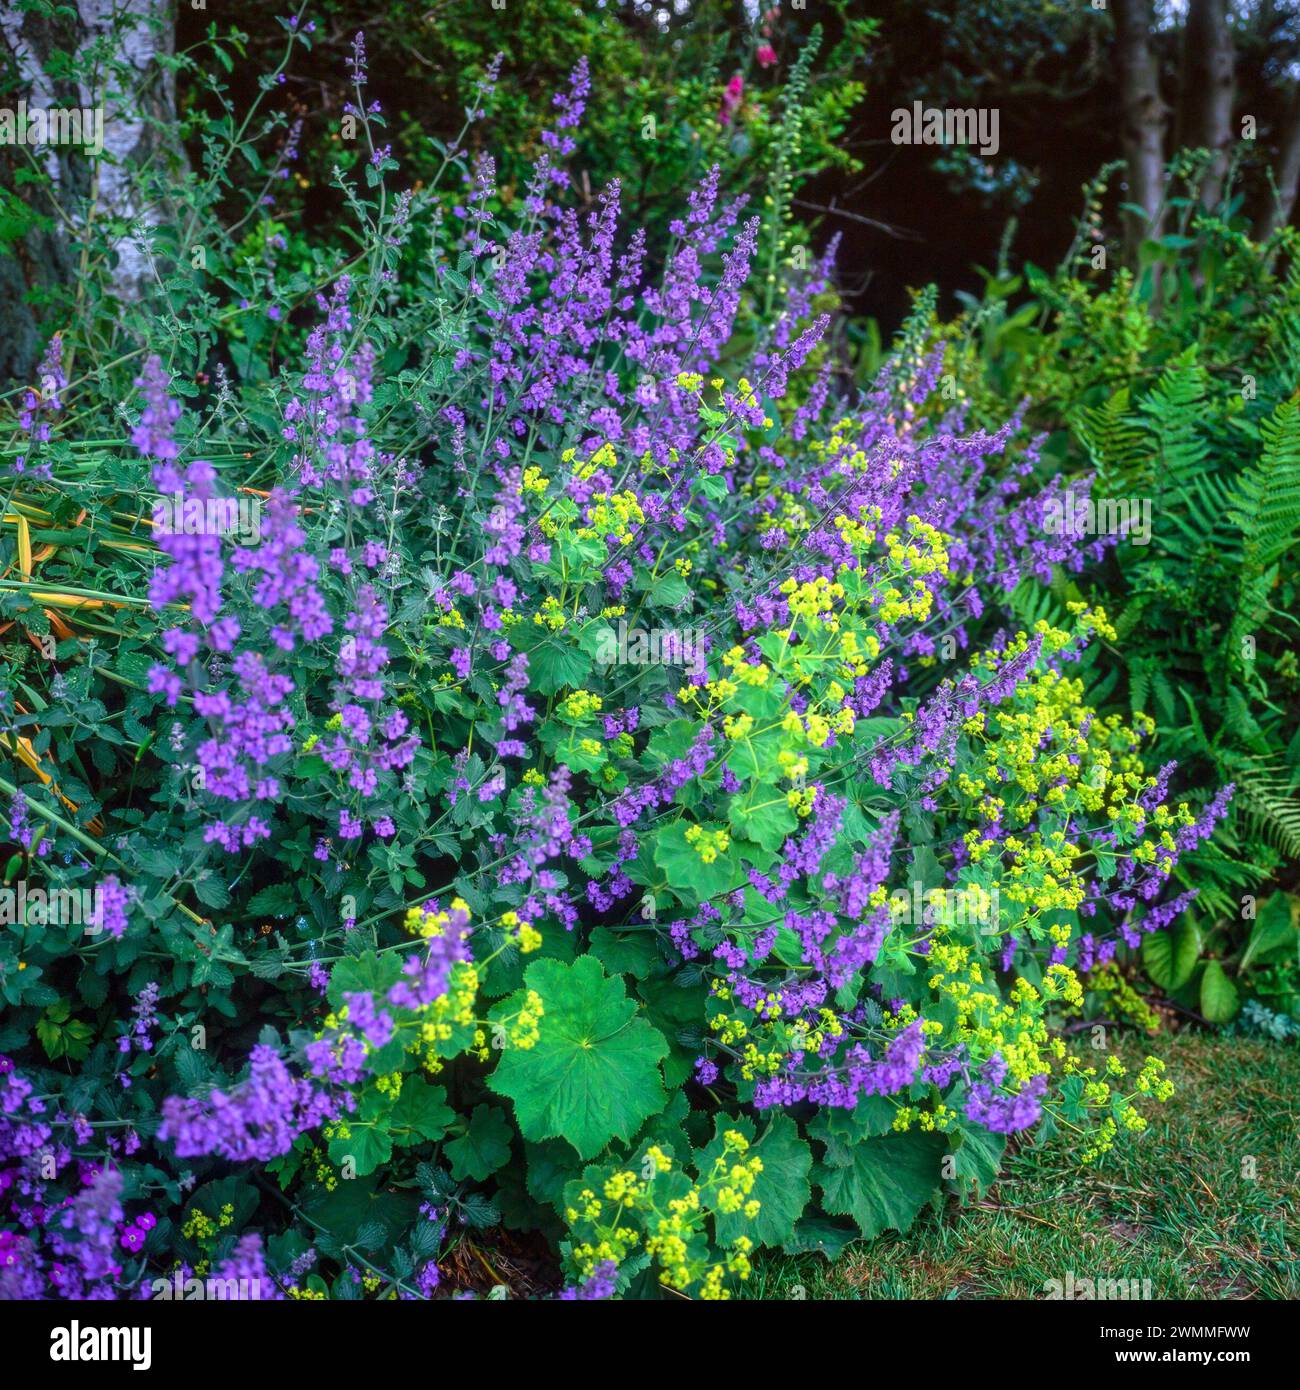 Colourful lavender blue flowers of Nepeta (Catmint) with yellow flowers of Alchemilla mollis (Lady's mantle) growing in English Garden border in June. Stock Photo